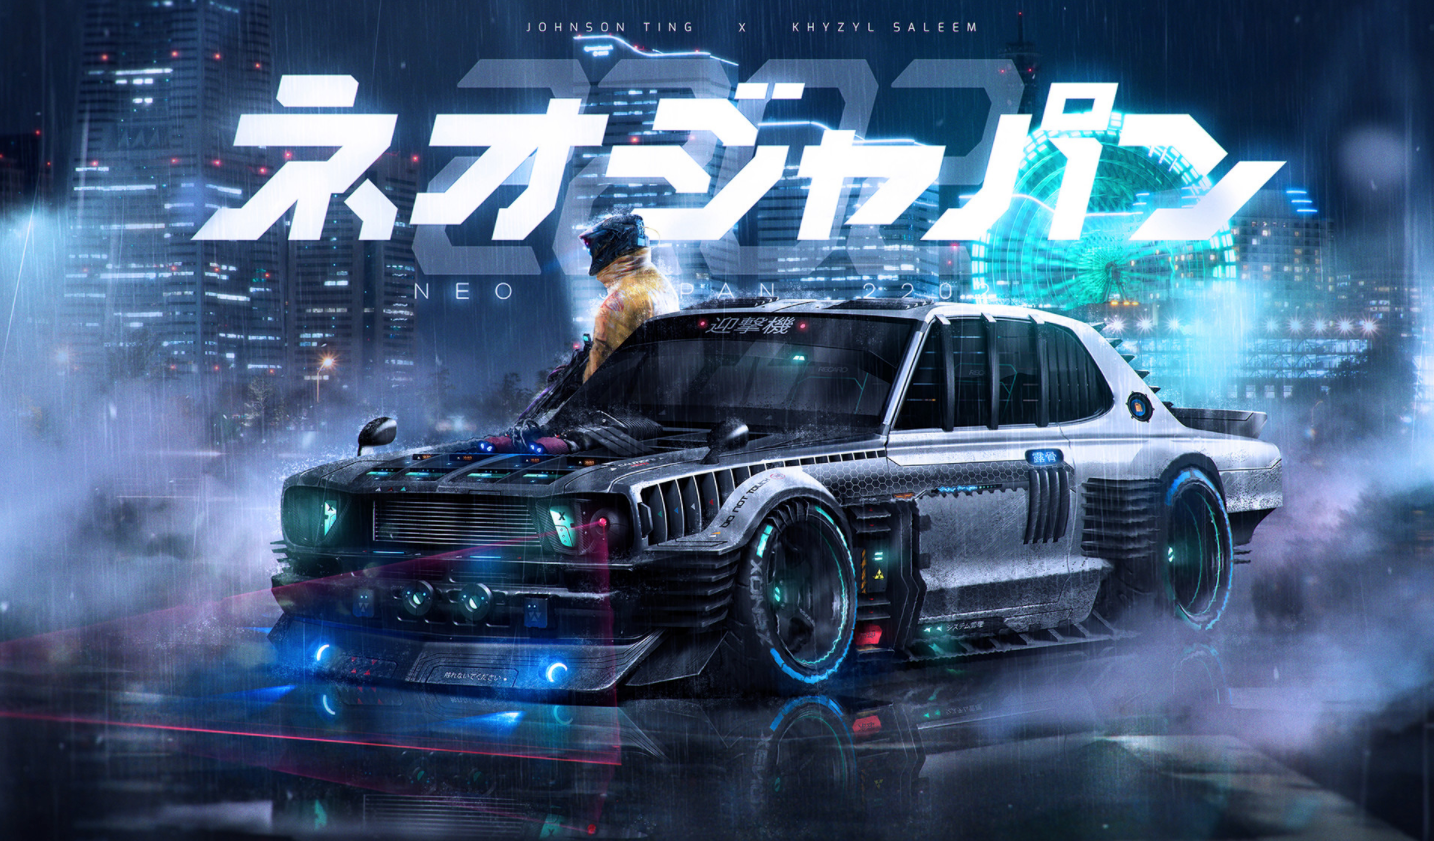 This Guy's Wallpaper Are Top Notch And Outrun Based! /khyzylsaleem